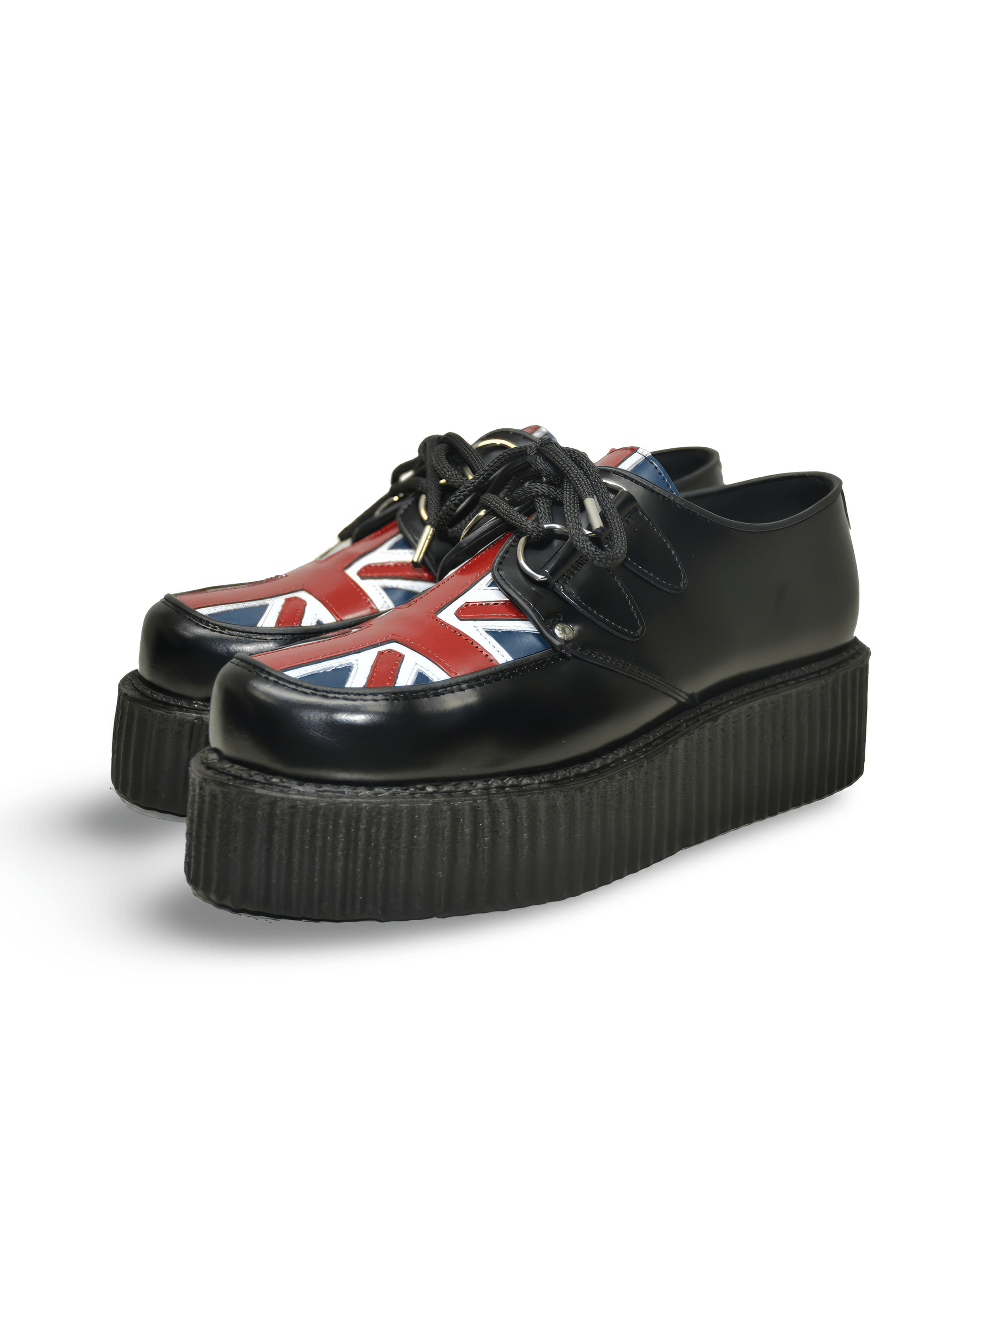 Unisex Black Leather Punk Style Double-Sole Creepers